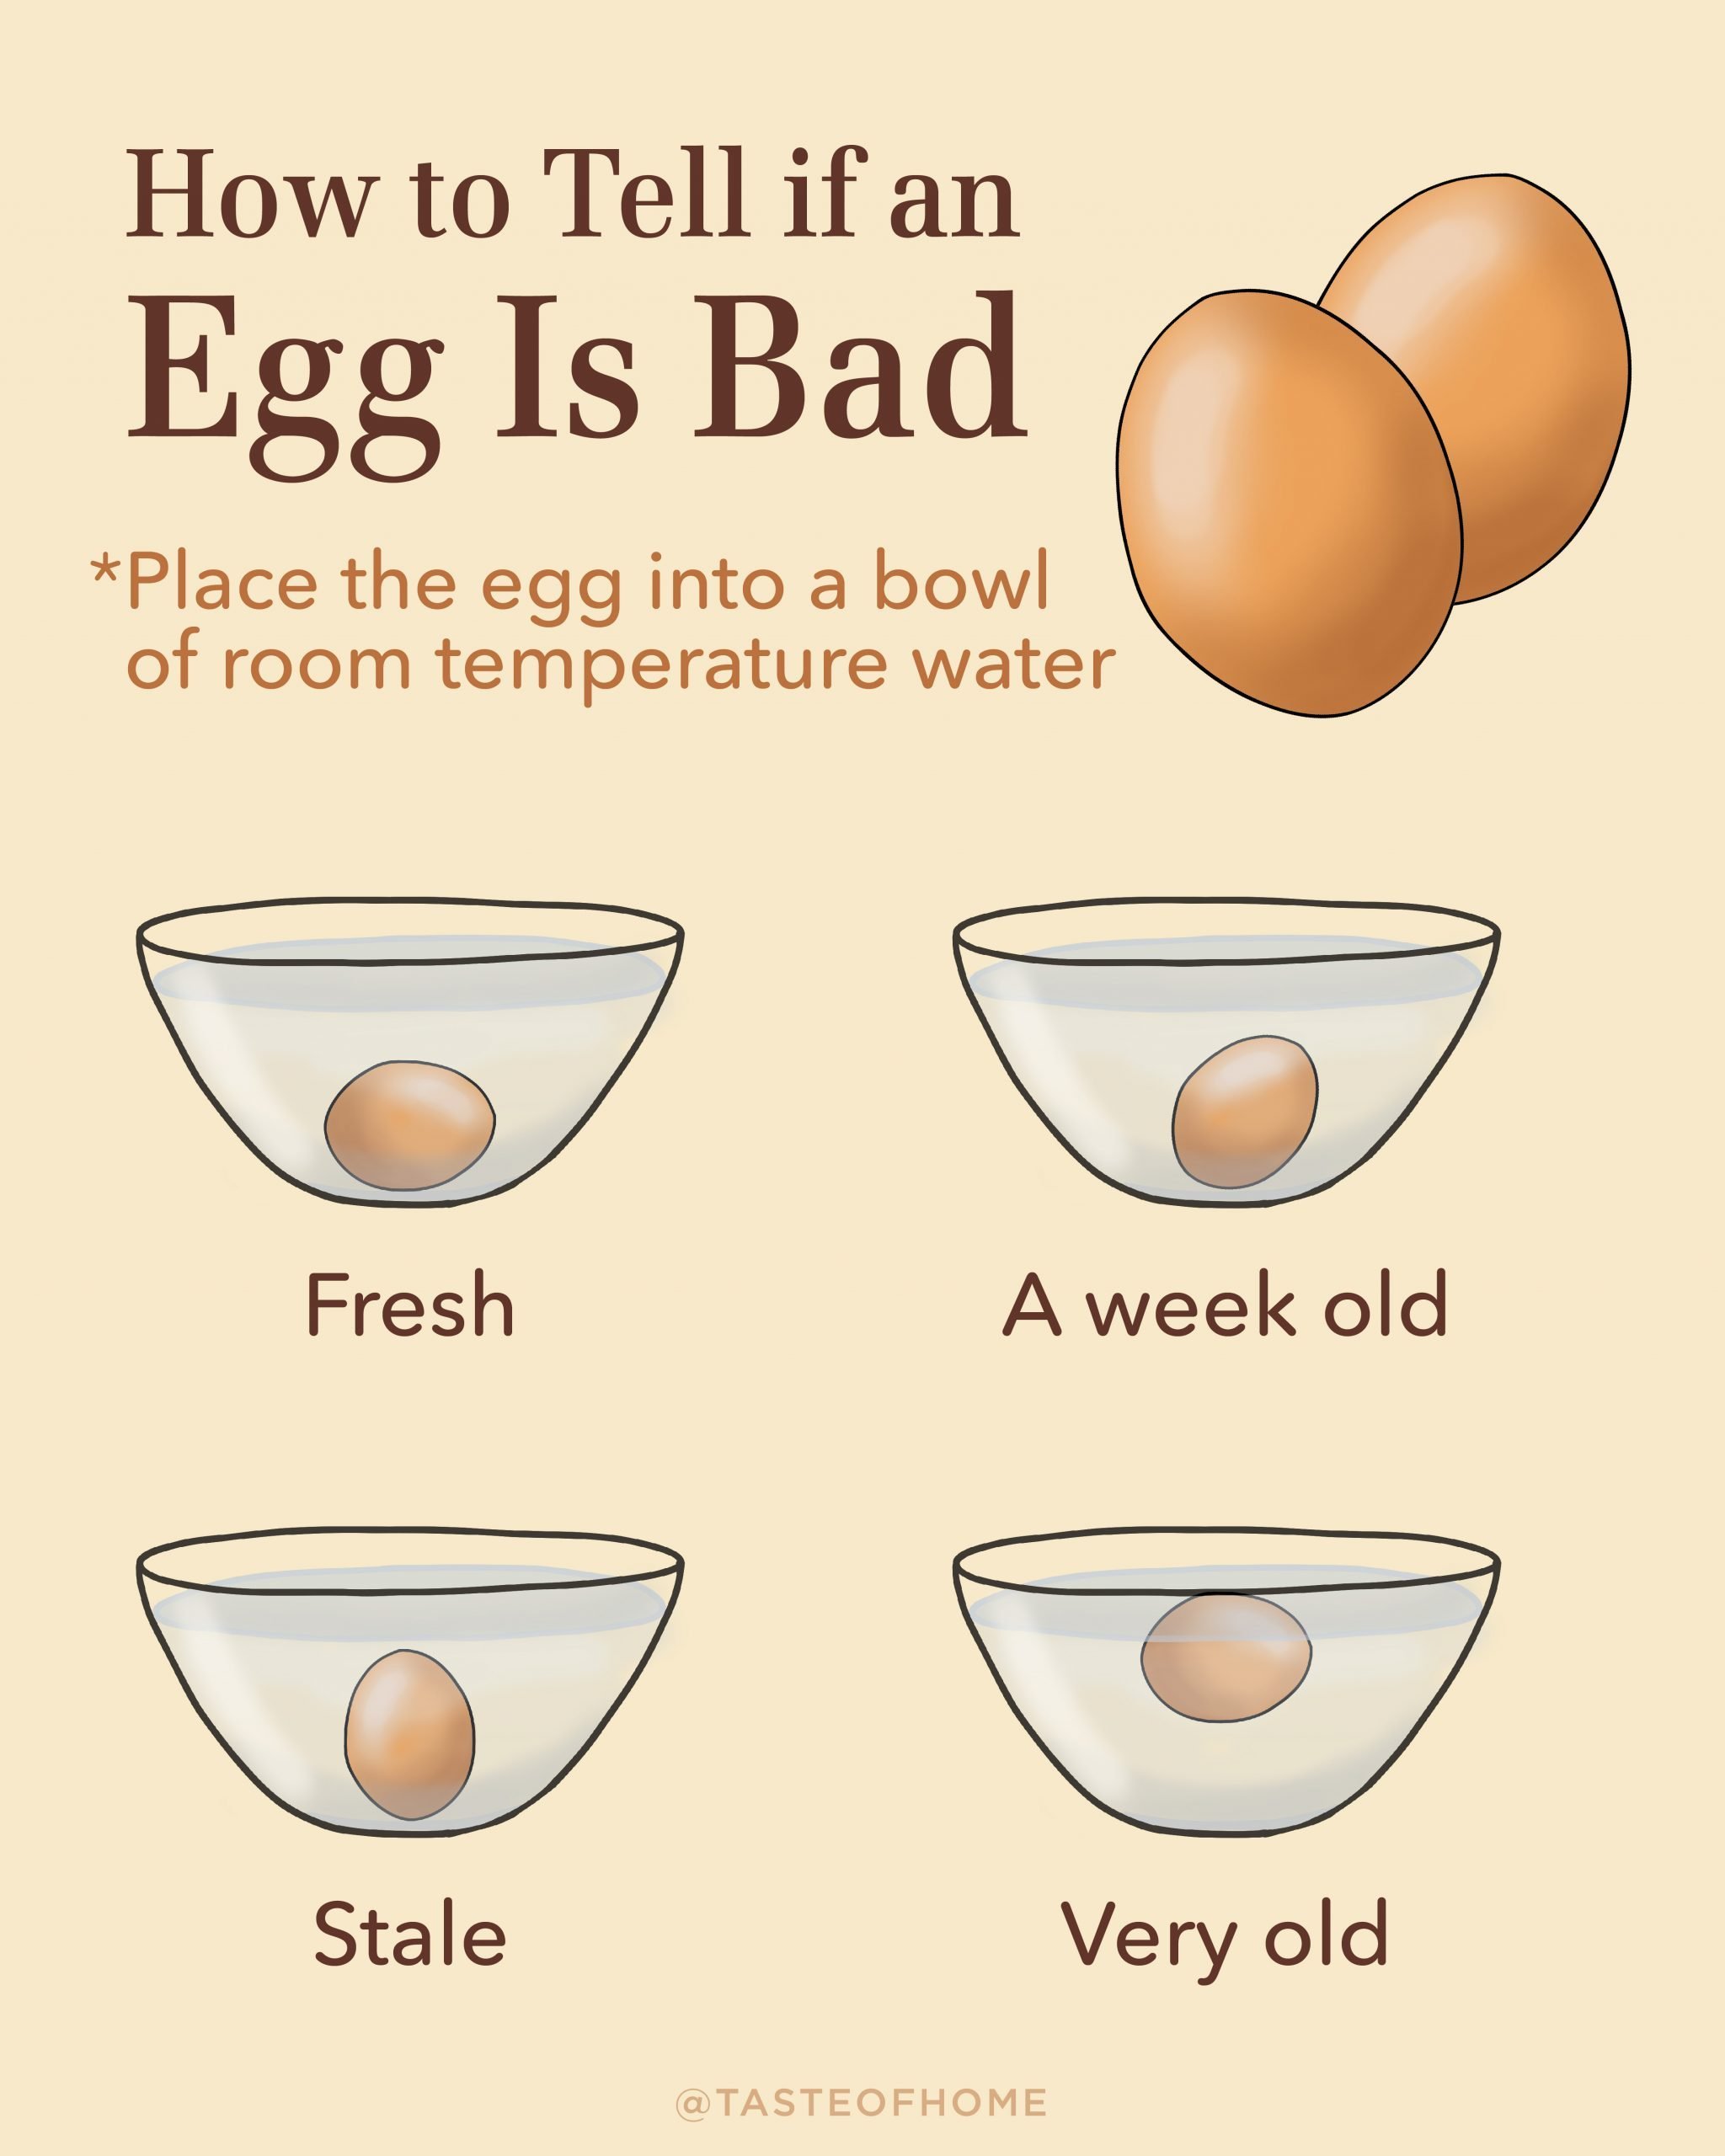 How to Tell If a Chicken Egg Is Rotten: A Simple Guide - My Favorite Chicken